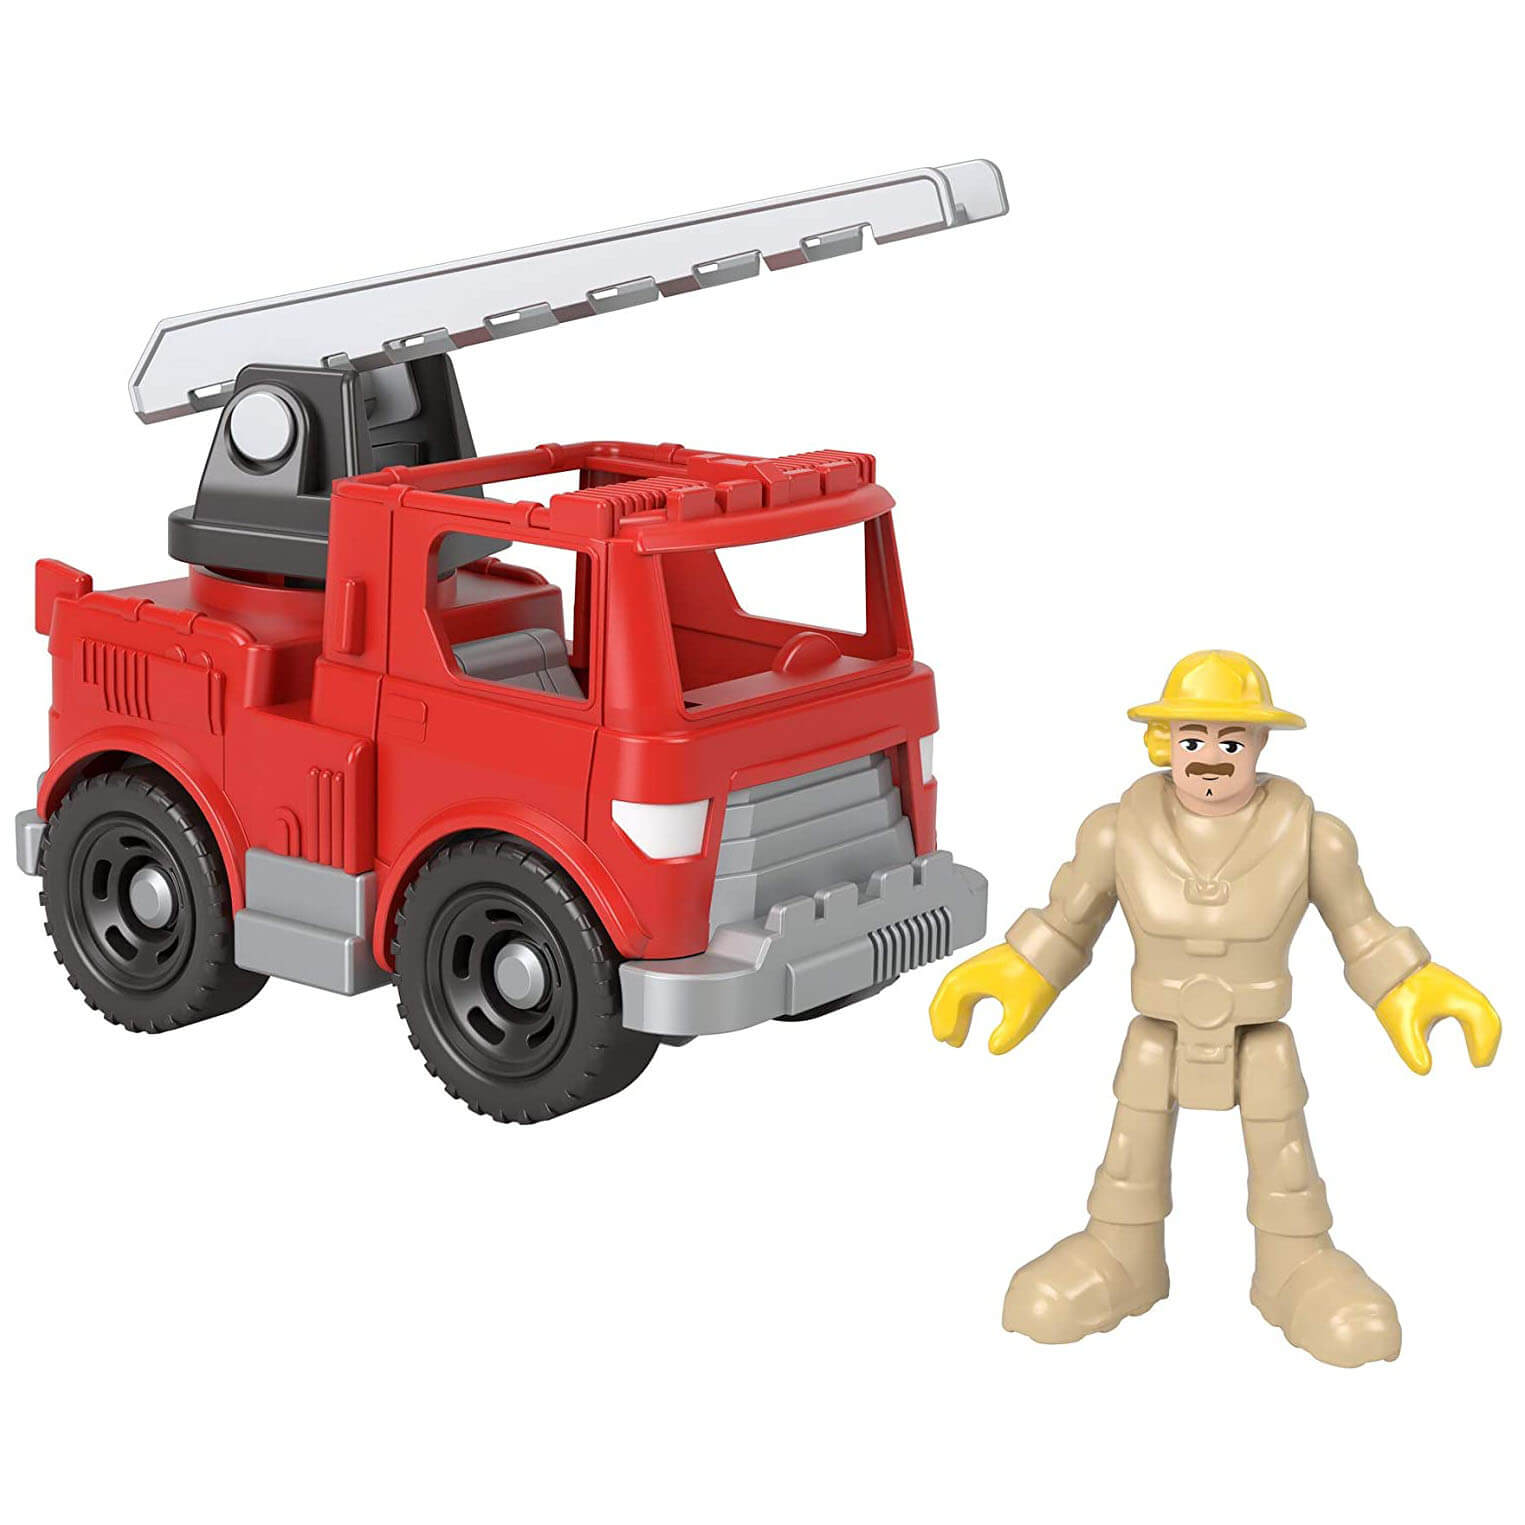 Fisher-Price Imaginext Push-Along Rescue Fire Truck